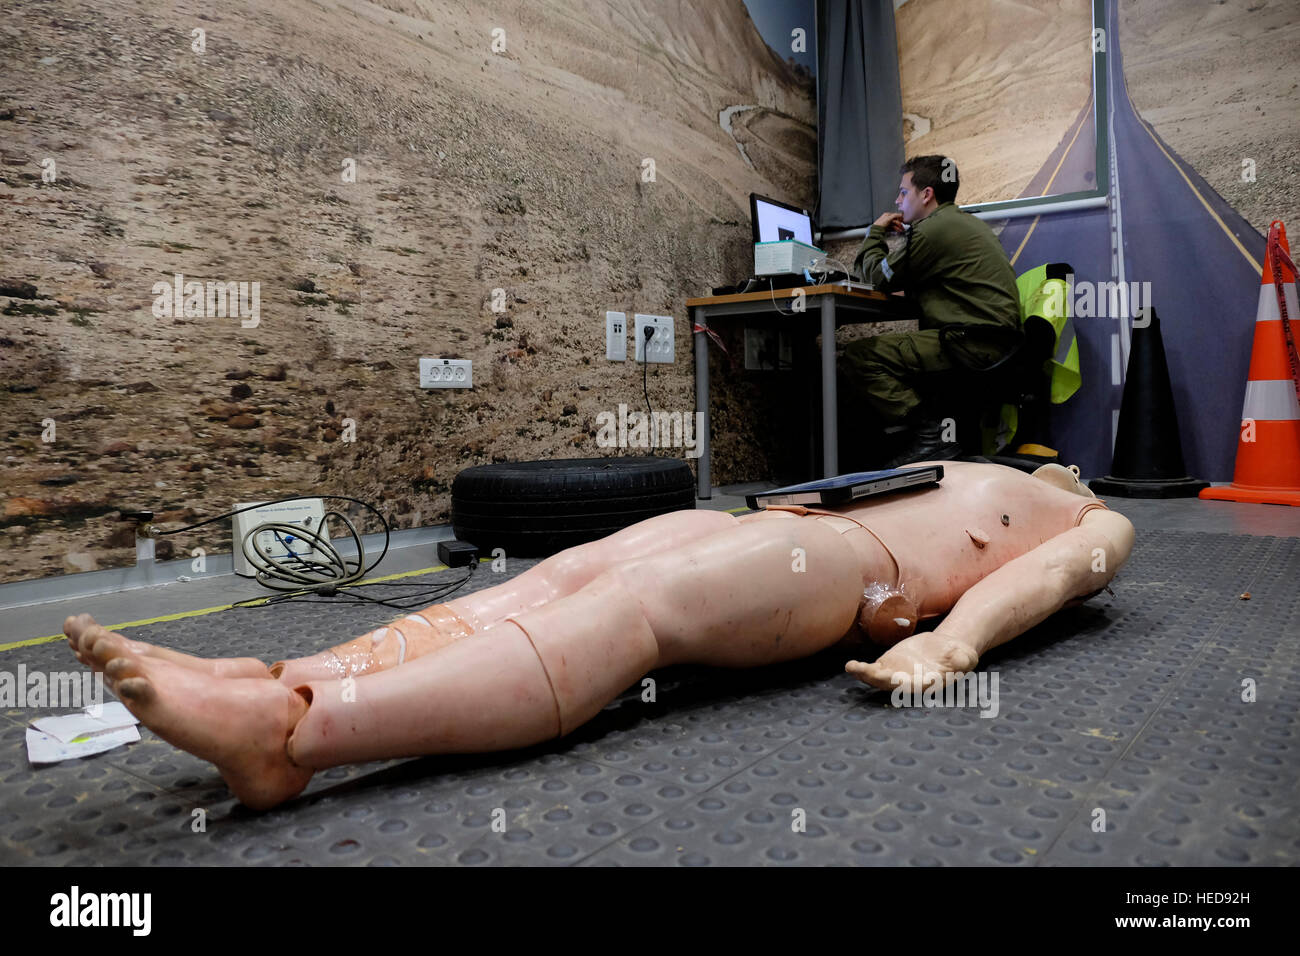 A plastic resus dummy lays in the floor of an IDF military paramedic training school in Camp Ariel Sharon, or in Hebrew Ir HaBahadim a complex of military bases including noncombat recruit training bases near the town of Yeruham in the Negev desert. Israel Stock Photo